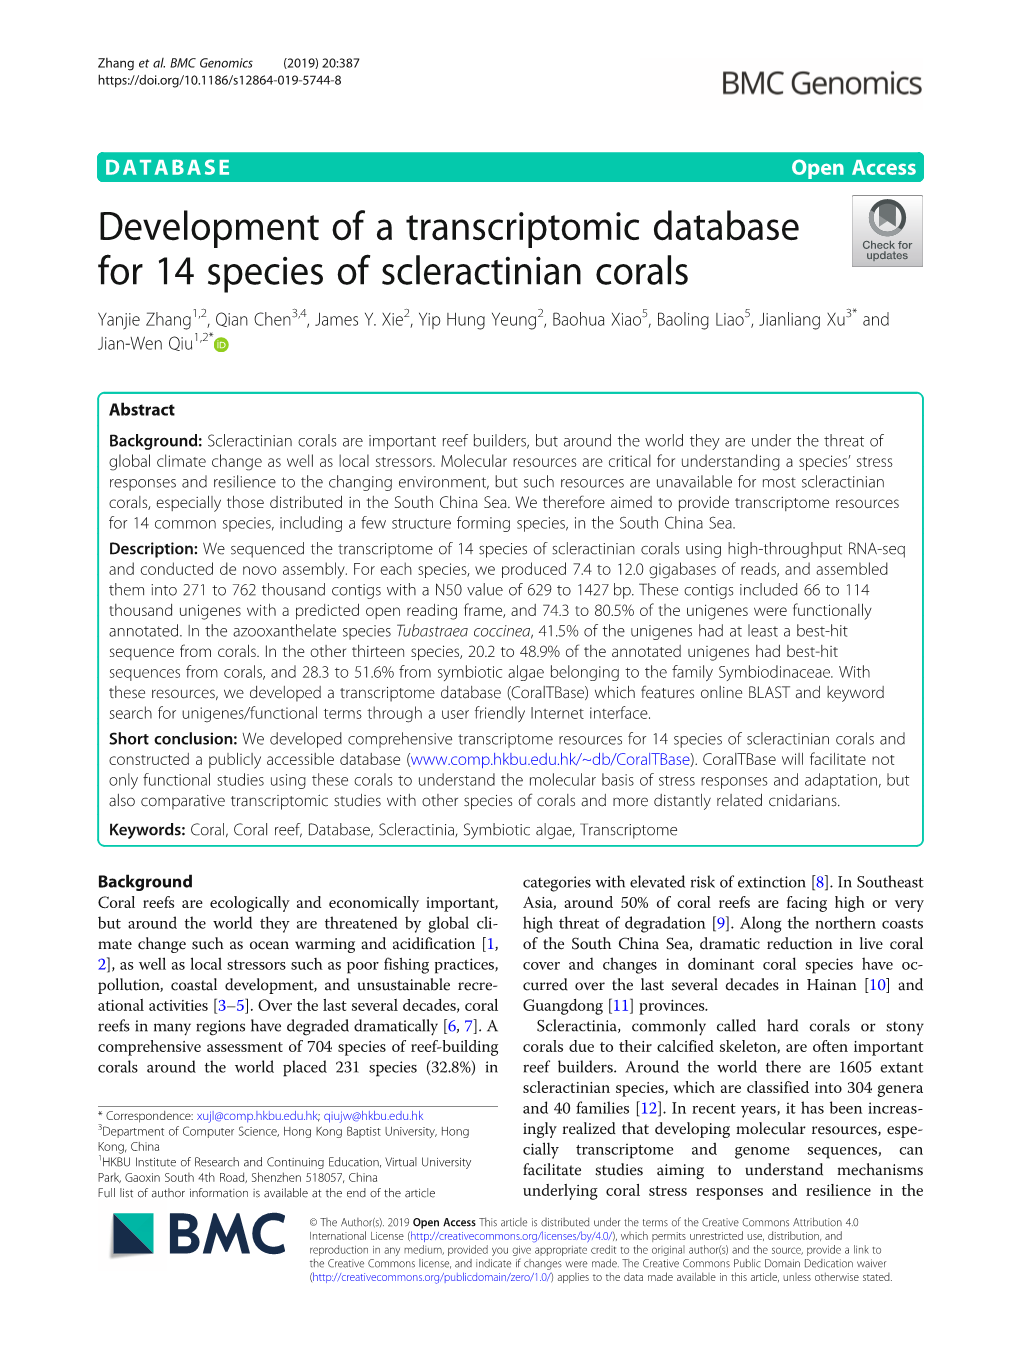 Development of a Transcriptomic Database for 14 Species of Scleractinian Corals Yanjie Zhang1,2, Qian Chen3,4, James Y